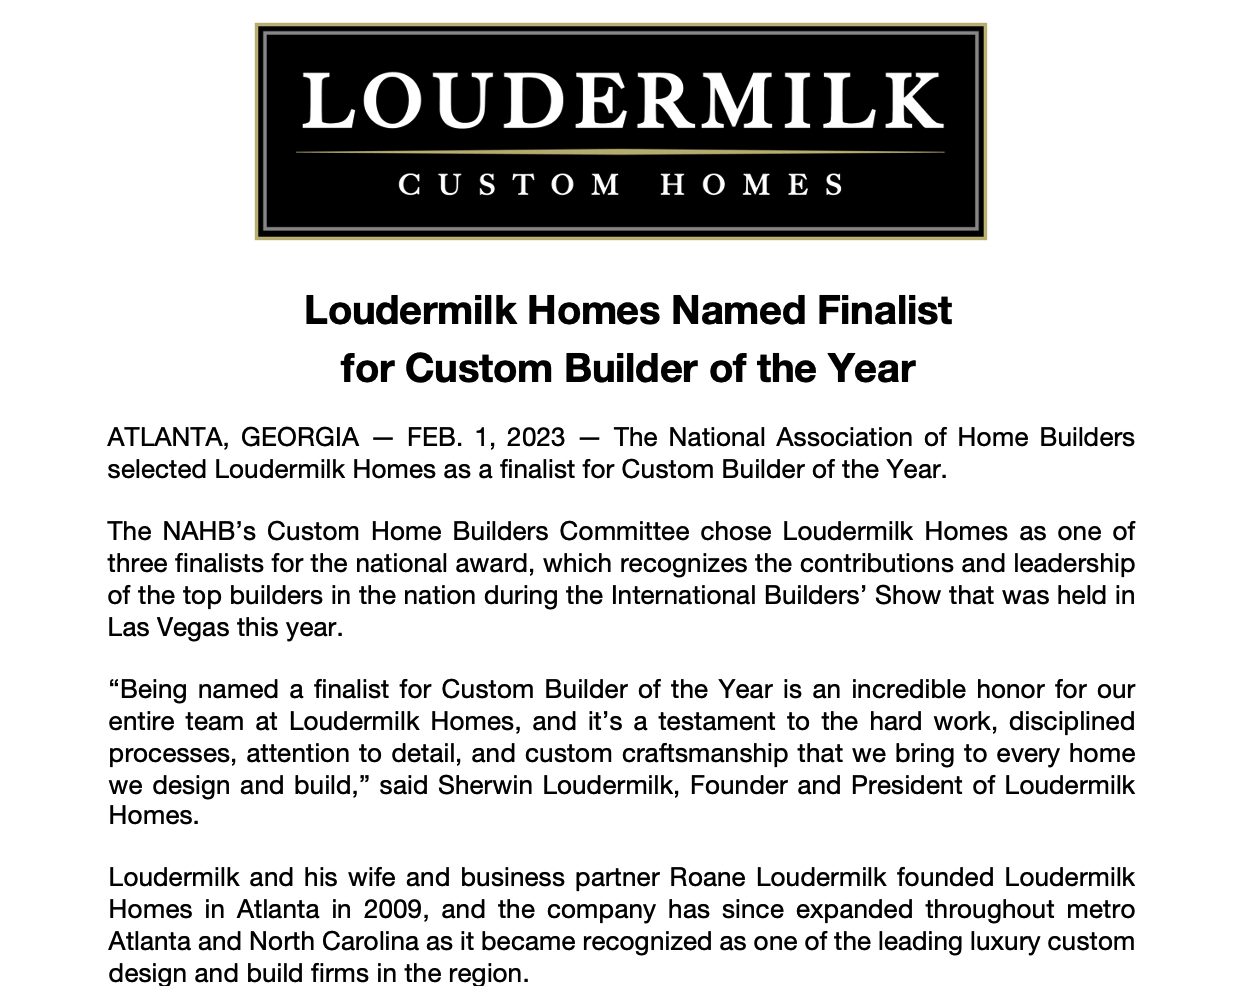 FINALIST FOR CUSTOM HOME BUILDER OF THE YEAR